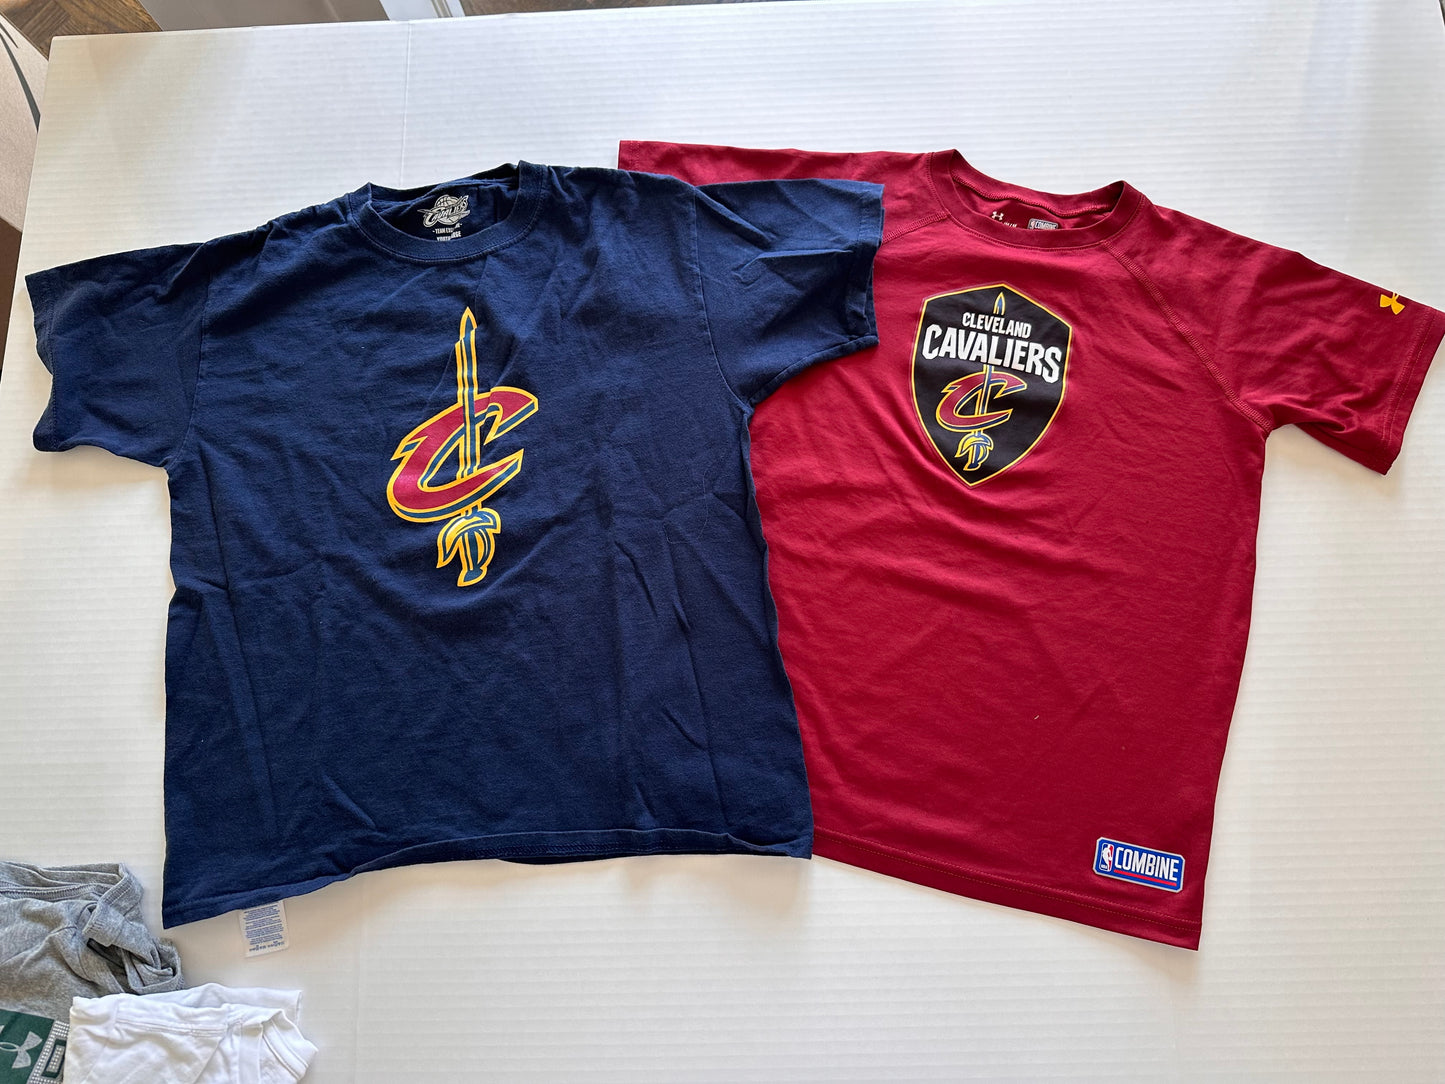 Lot of youth boys size M and L Cleveland Cavaliers shirt